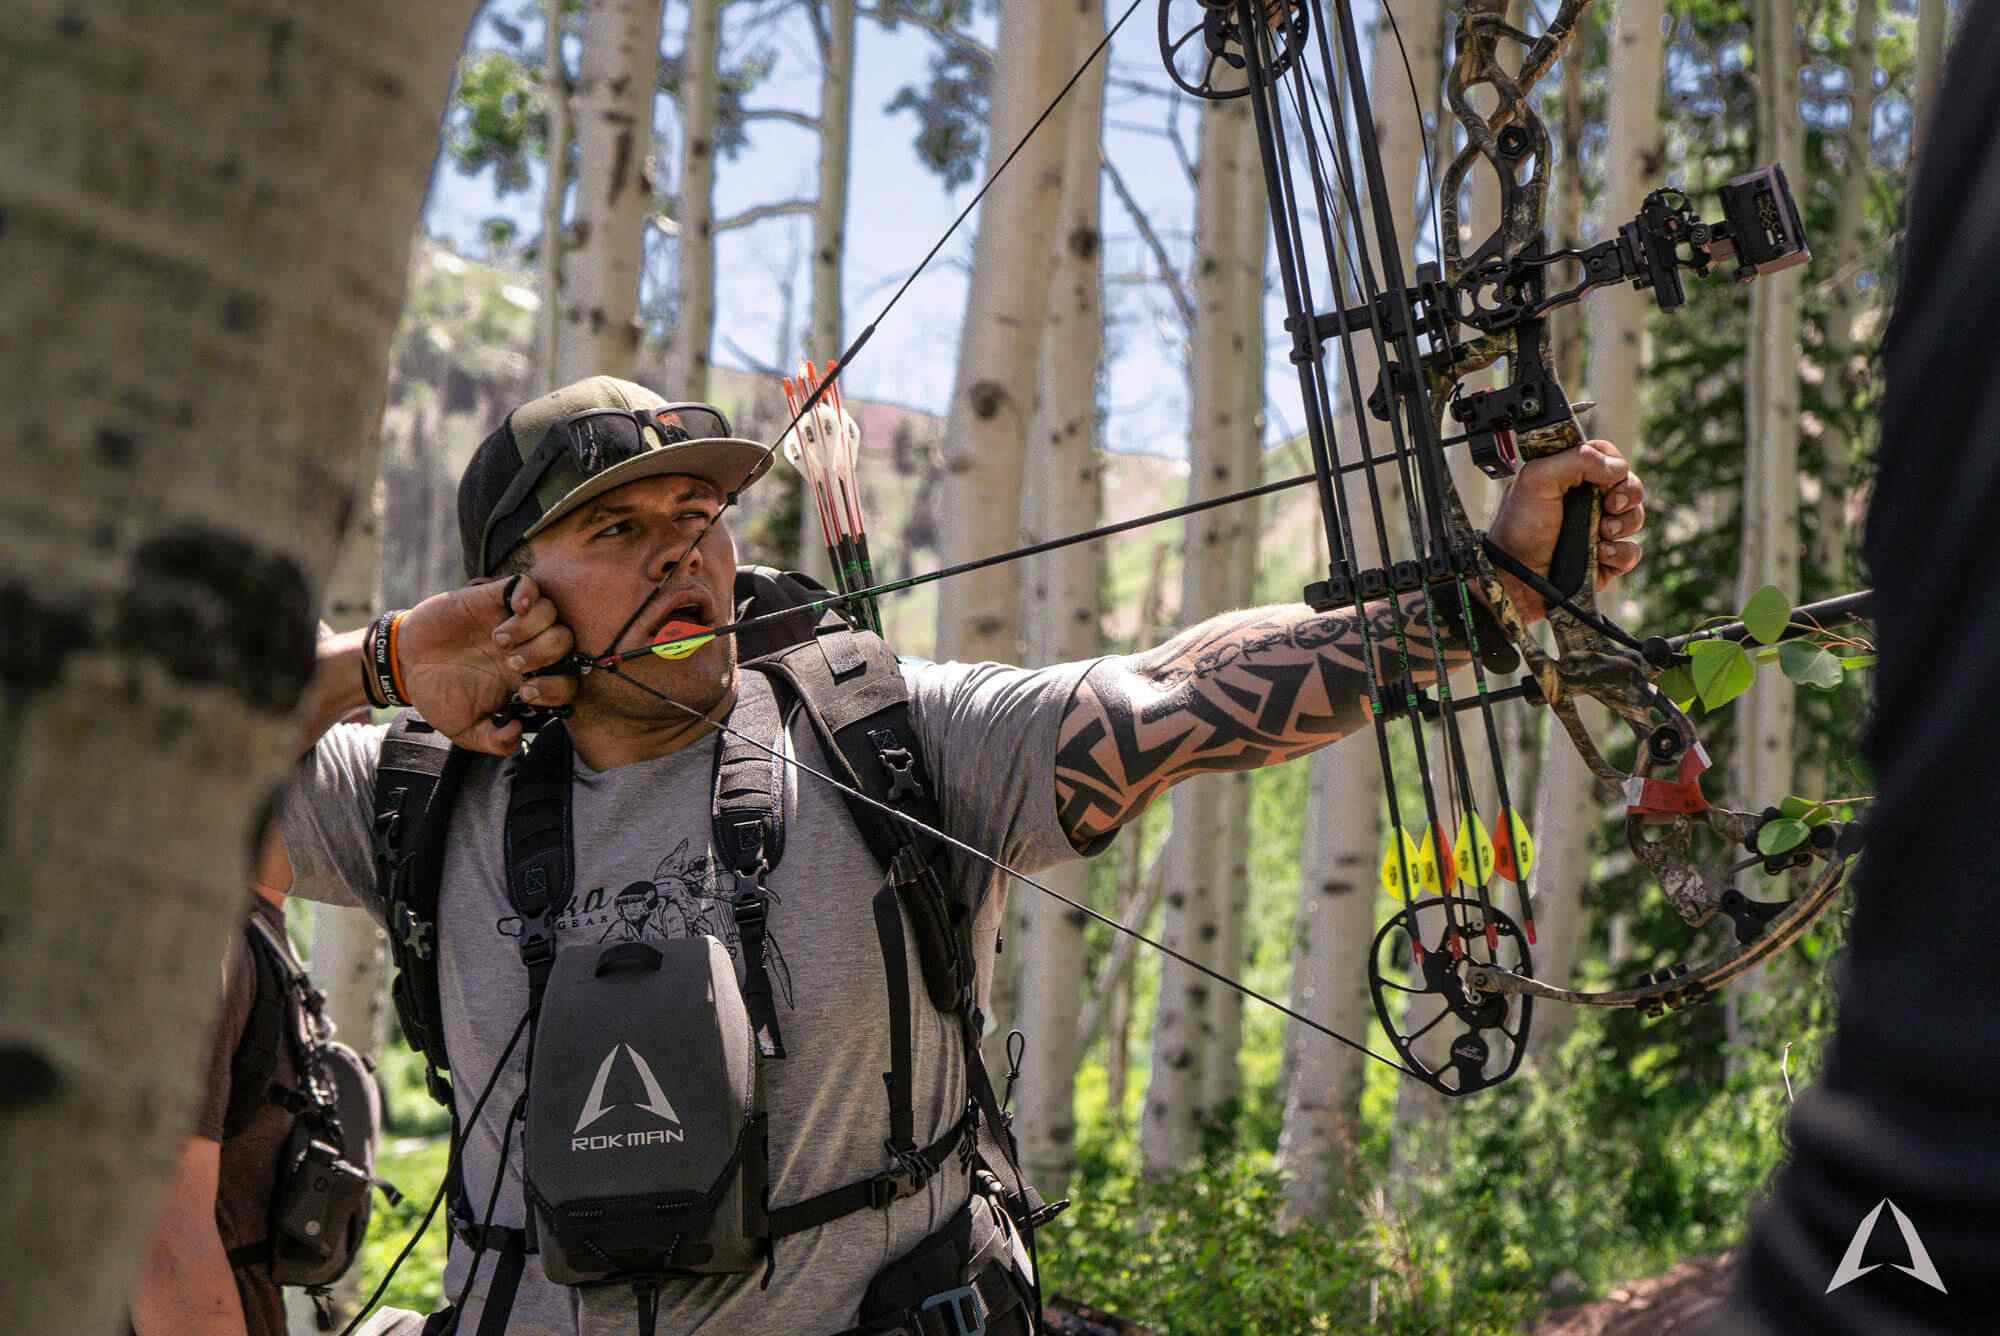 Archery gear that can be found at Rokman Gear within the Yellowstone Teton Territory, located in St. Anthony, Idaho